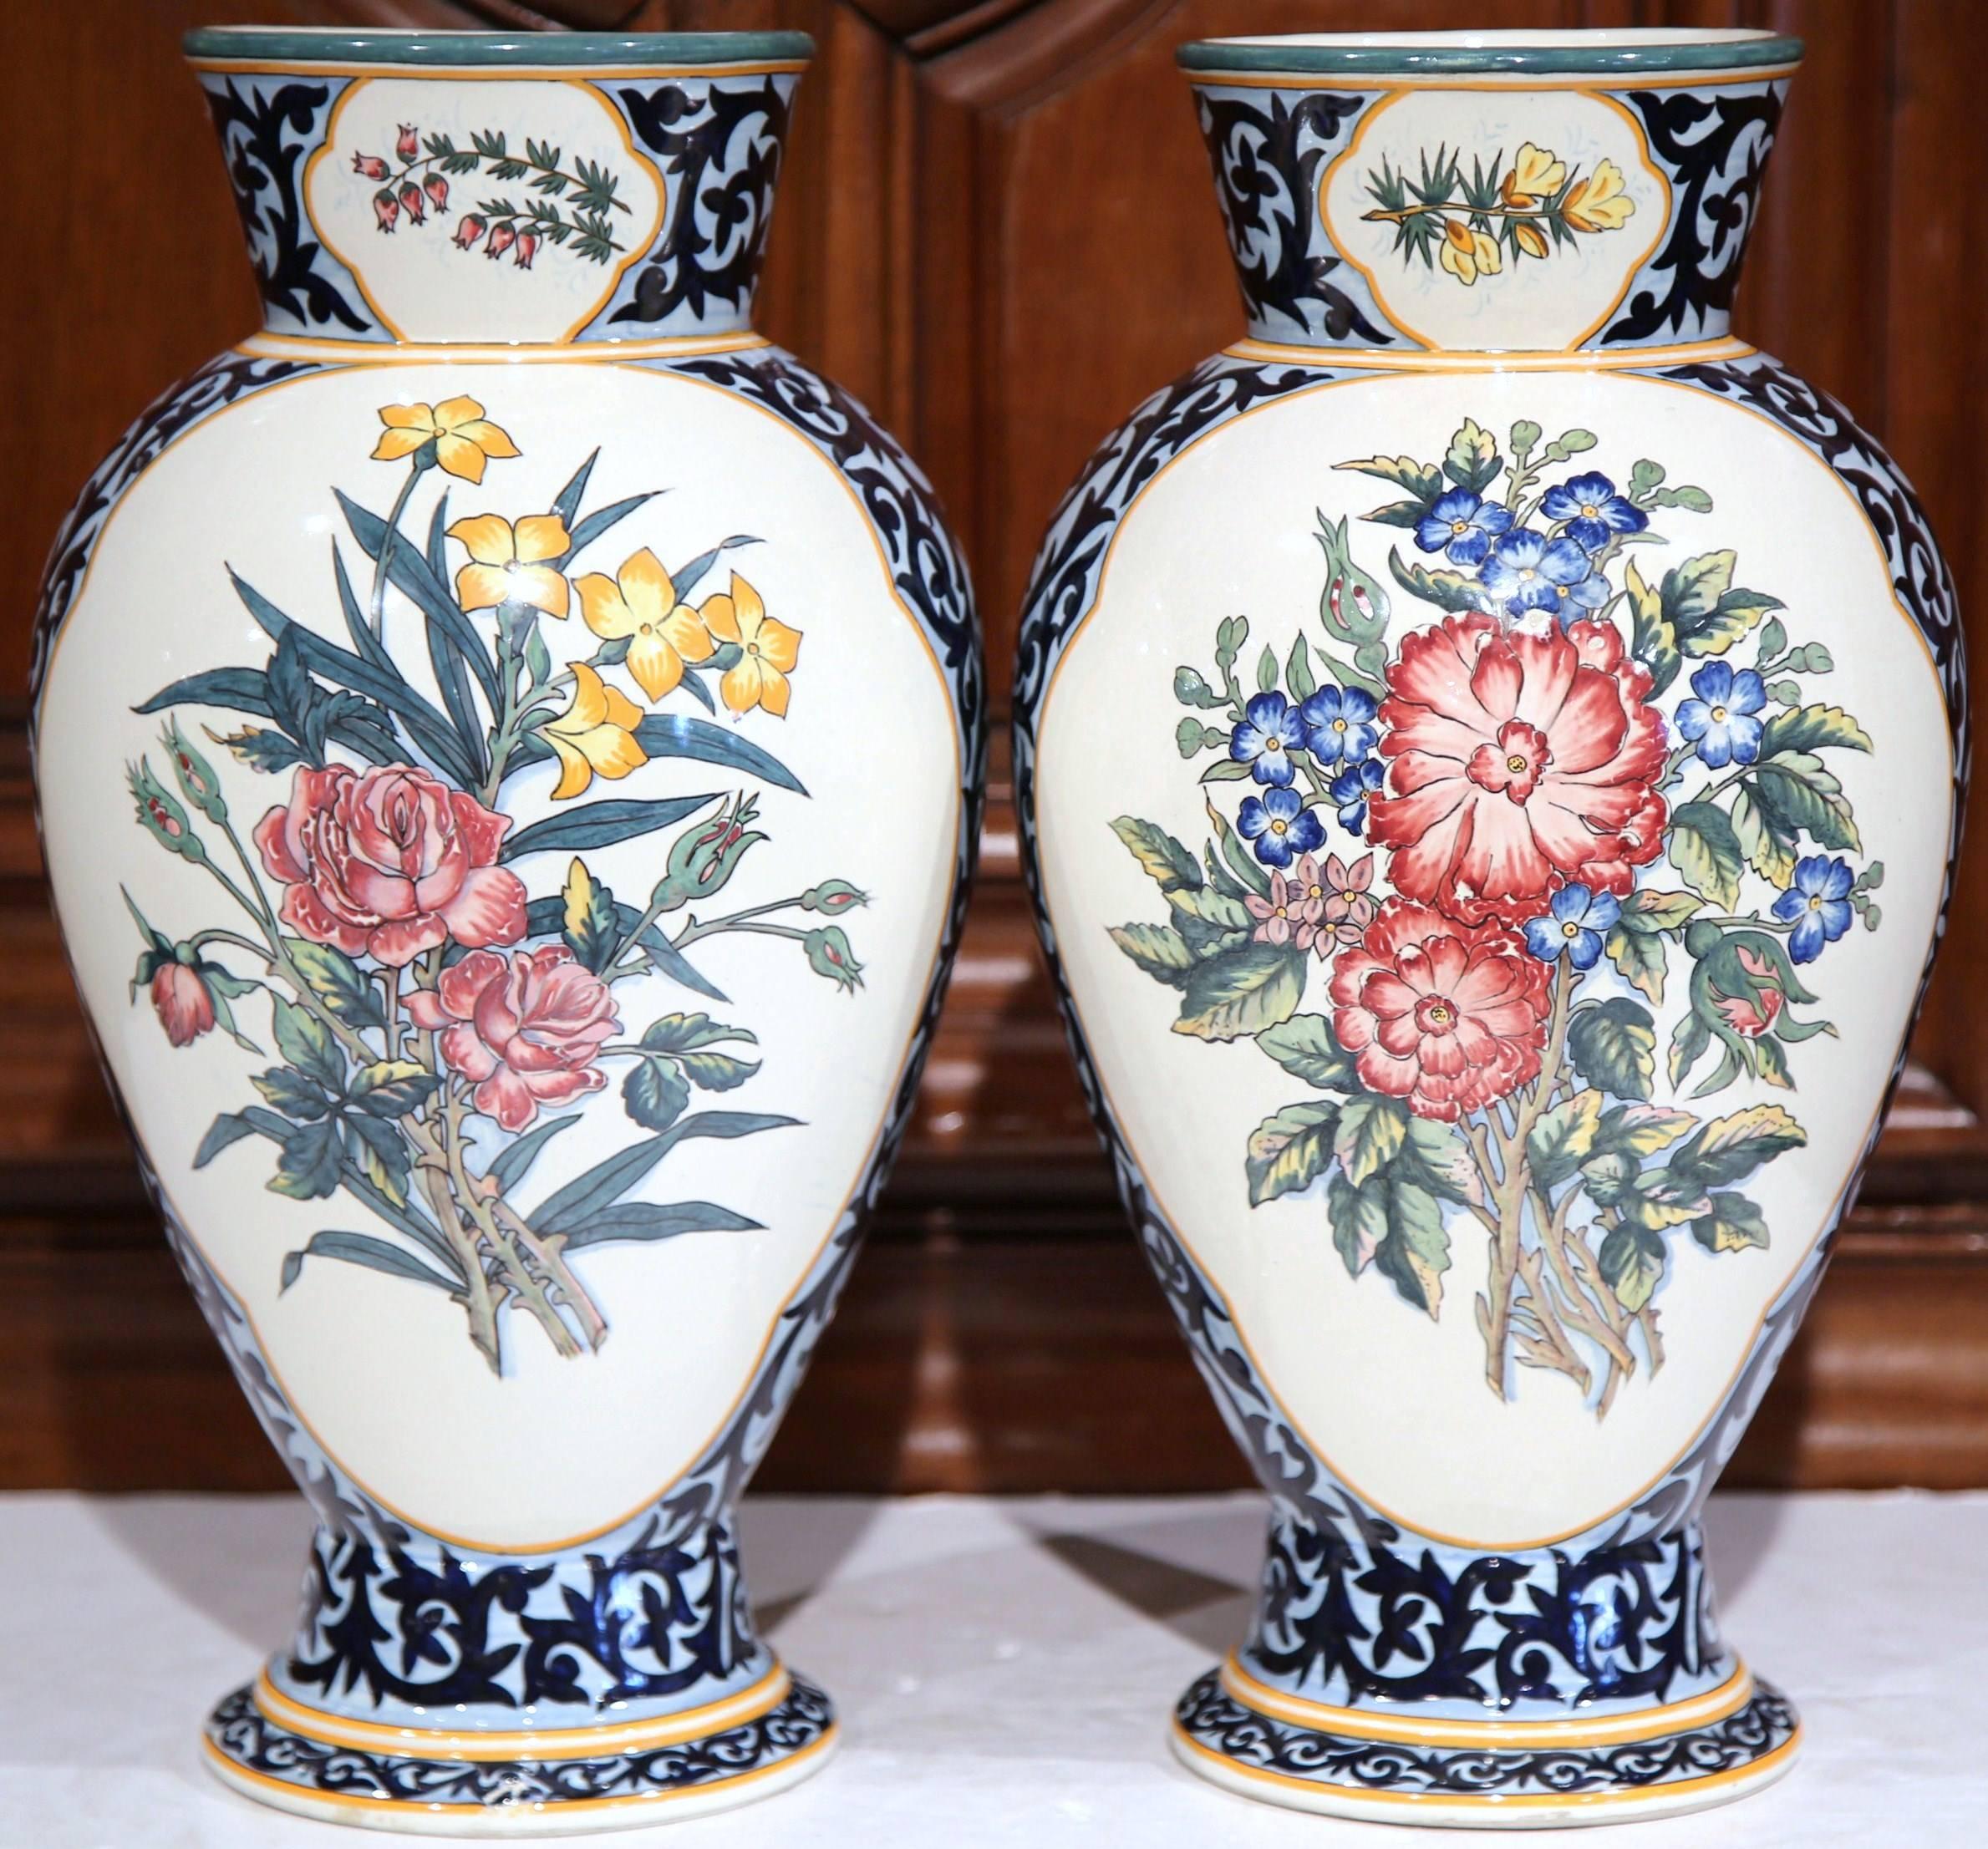 Pair of 19th Century French Painted Faience Vases Signed Henriot Quimper 2